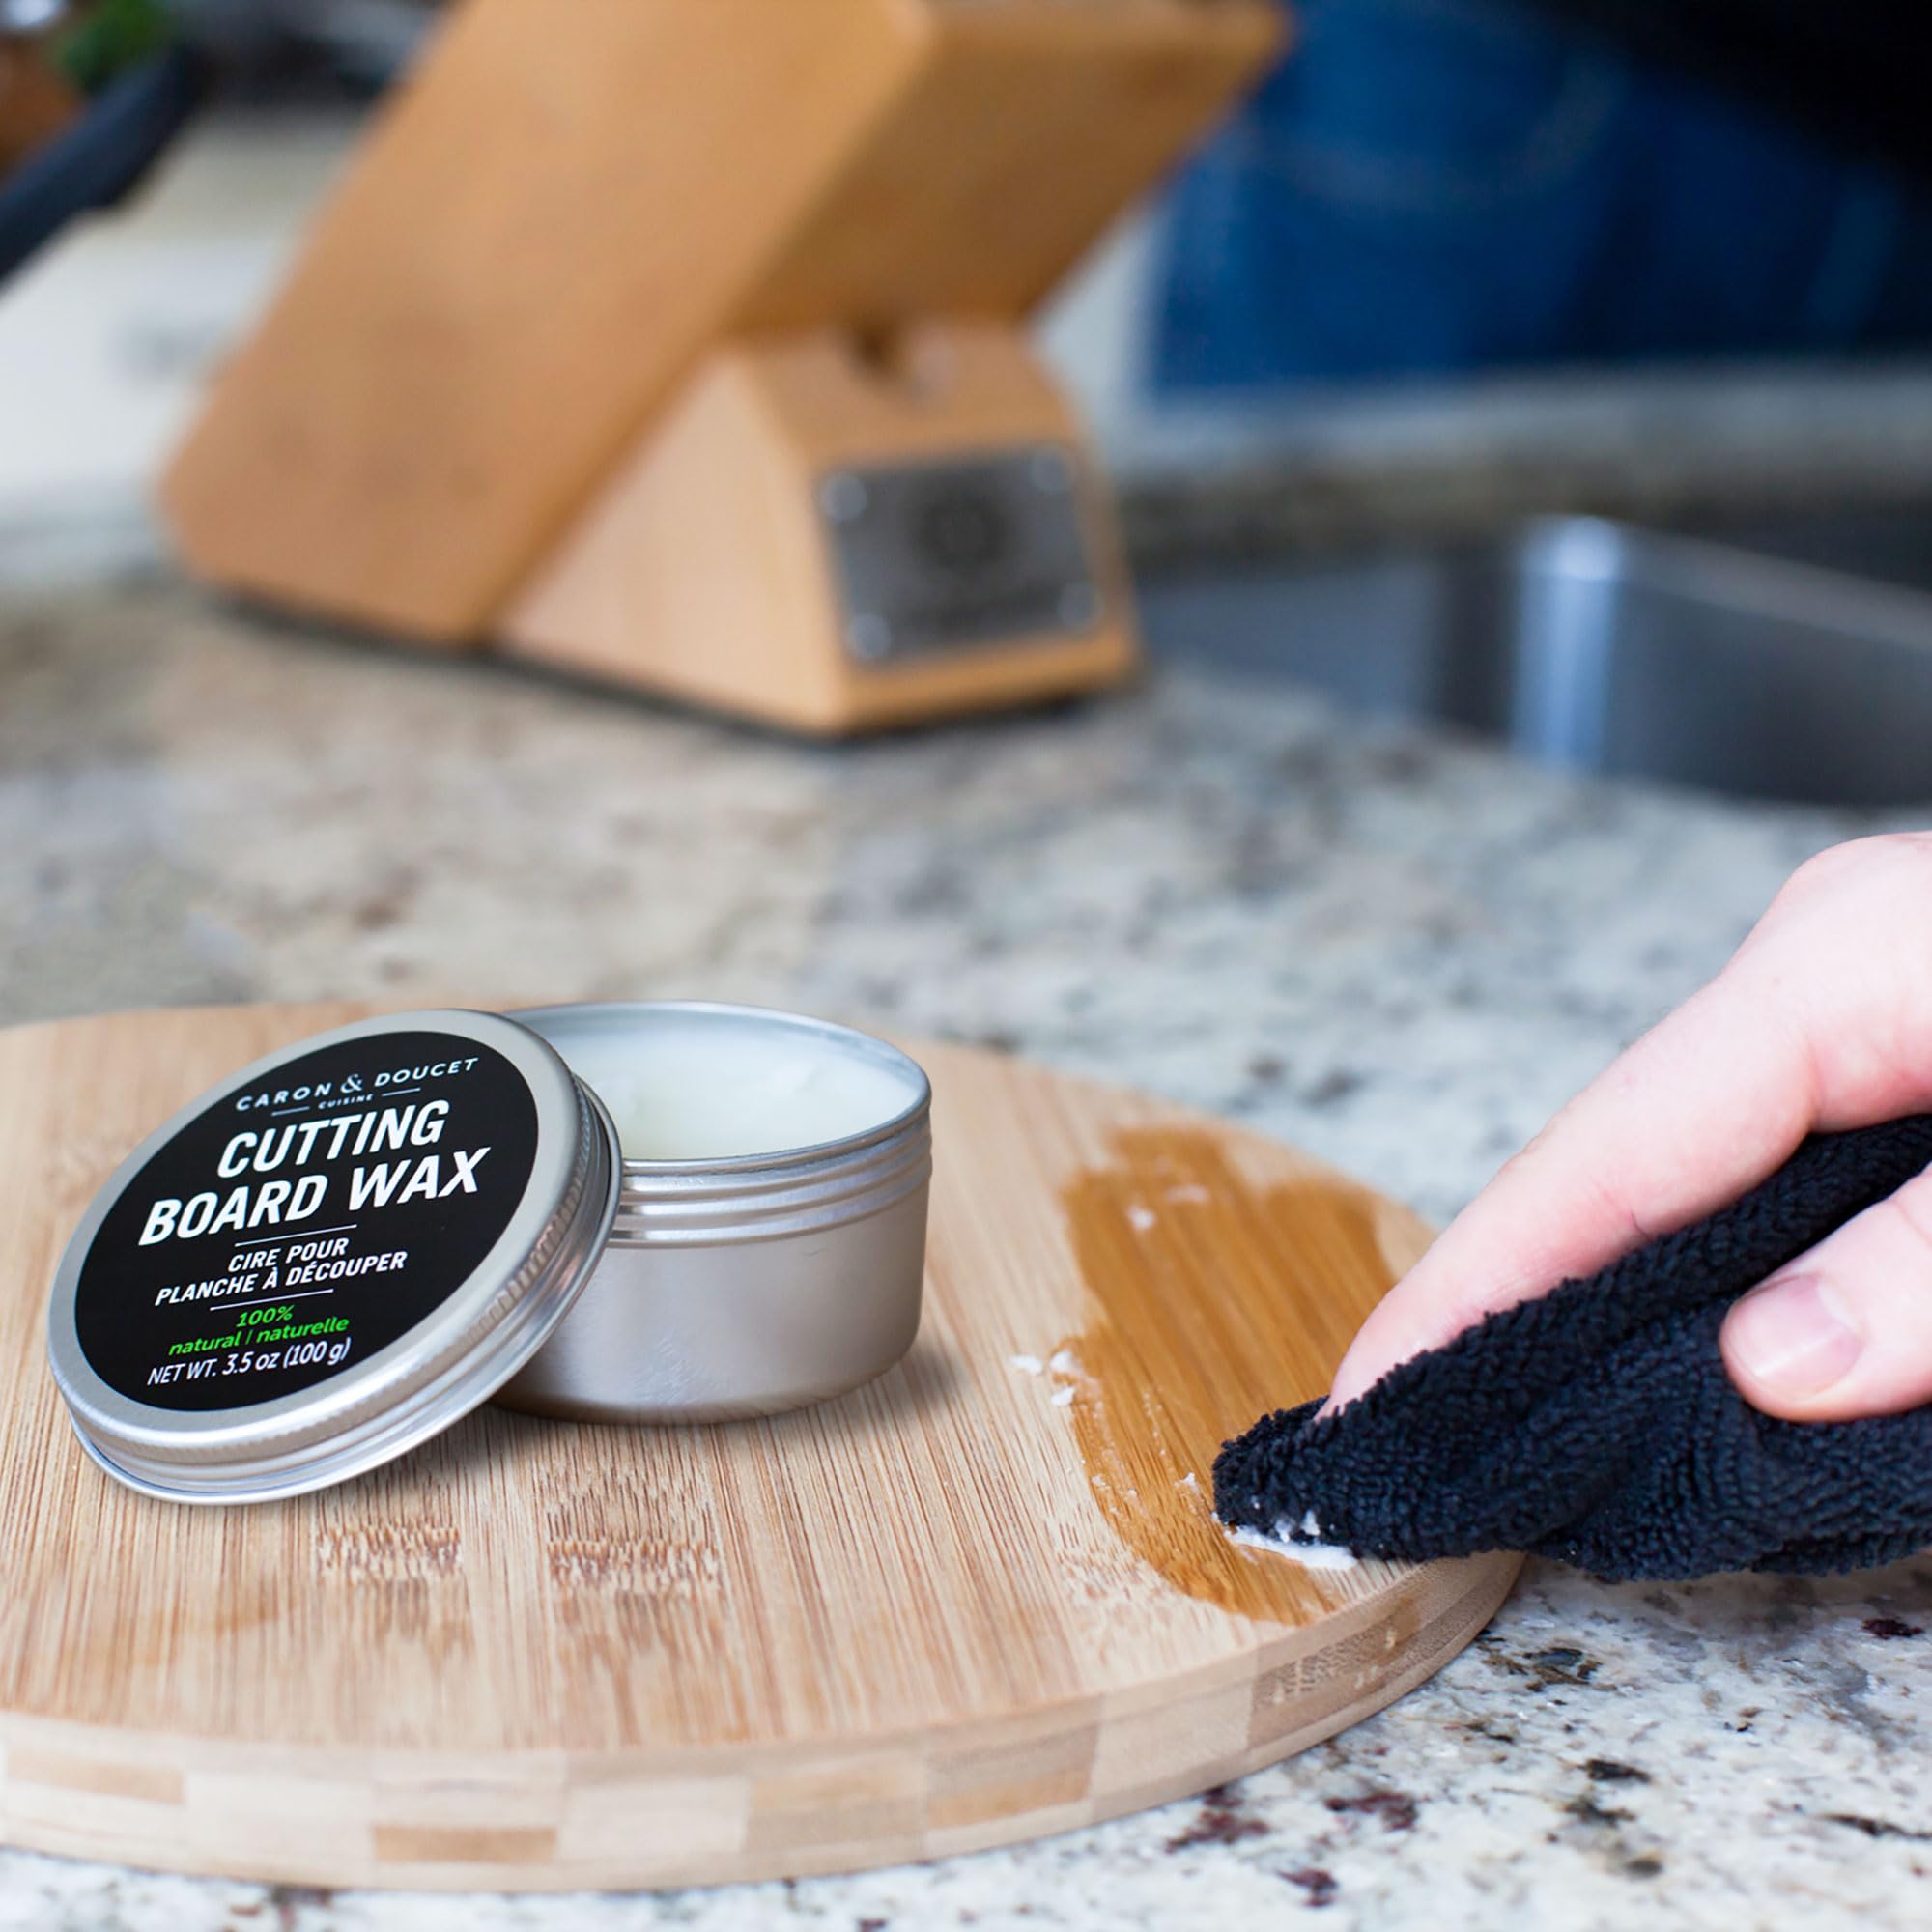 Caron & Doucet - Cutting Board & Butcher Block Wood Conditioning & Finishing Wax | 100% Plant-Based & Vegan, Best for Wood & Bamboo Conditioning & Sealing | Does NOT Contain Mineral Oil!